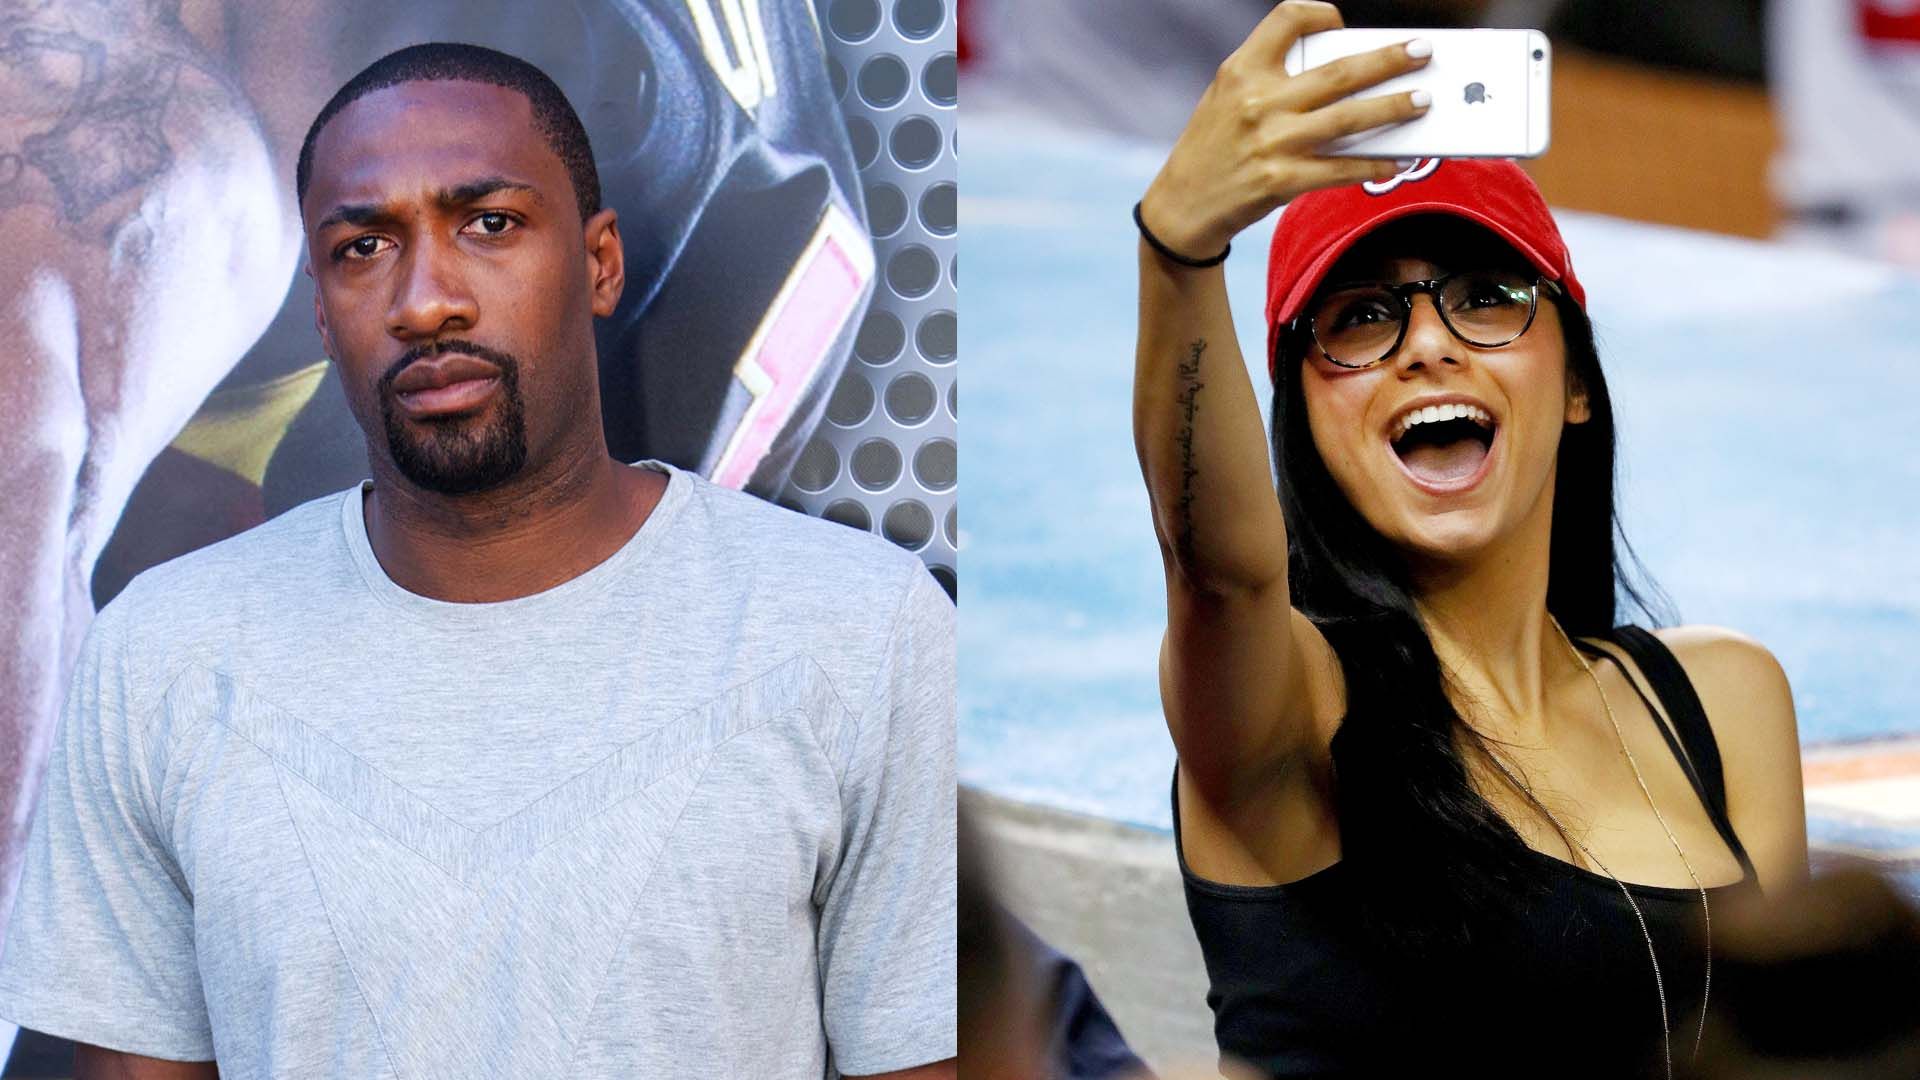 Gilbert Arenas Exposed The Hell Out Of Porn Star Mia Khalifa For Trying To Slide In His DM For The D News pic